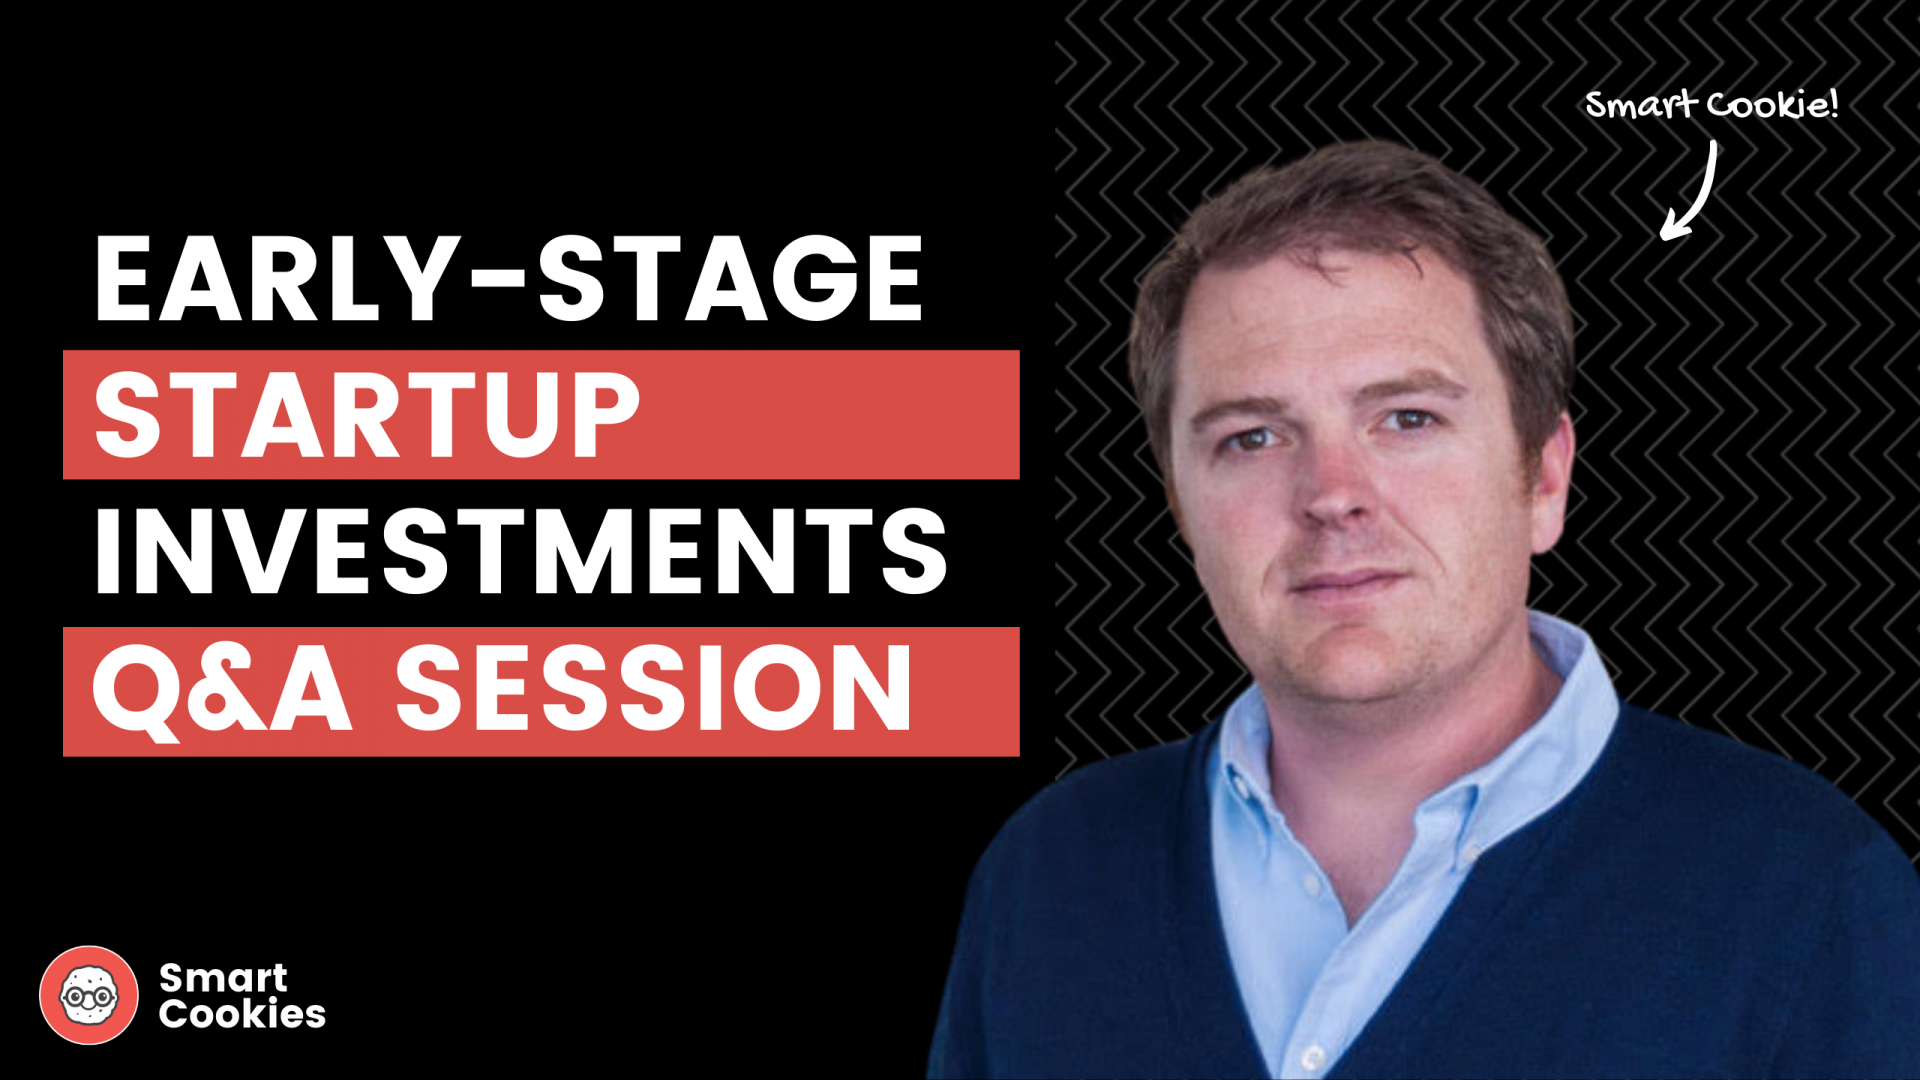 Picture of Tim Morgan next to text: "early stage startup investments Q&A"